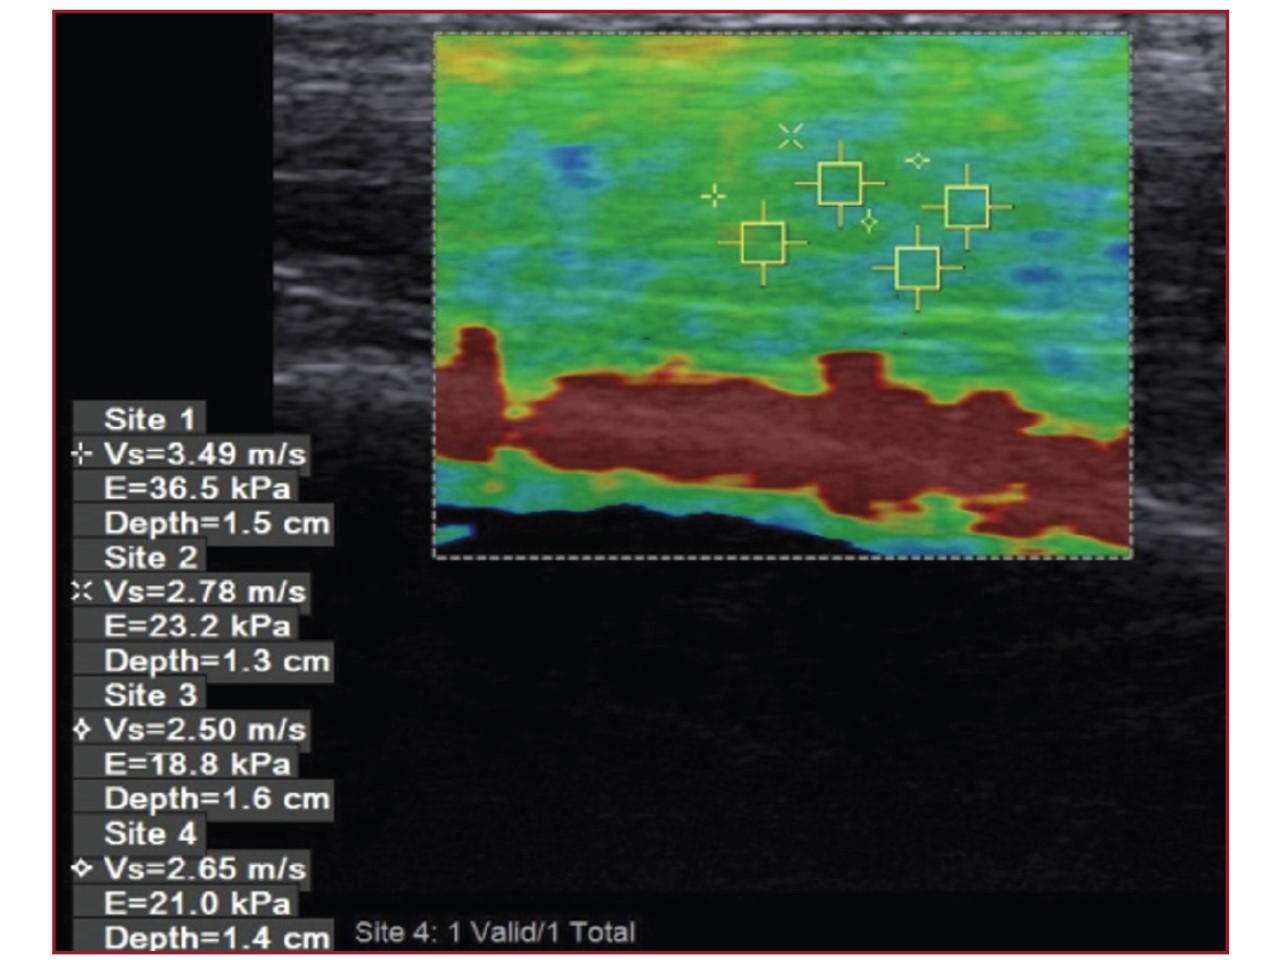 VTIQ measurements of MTJ of Achilles tendon in a 14 years old healthy boy